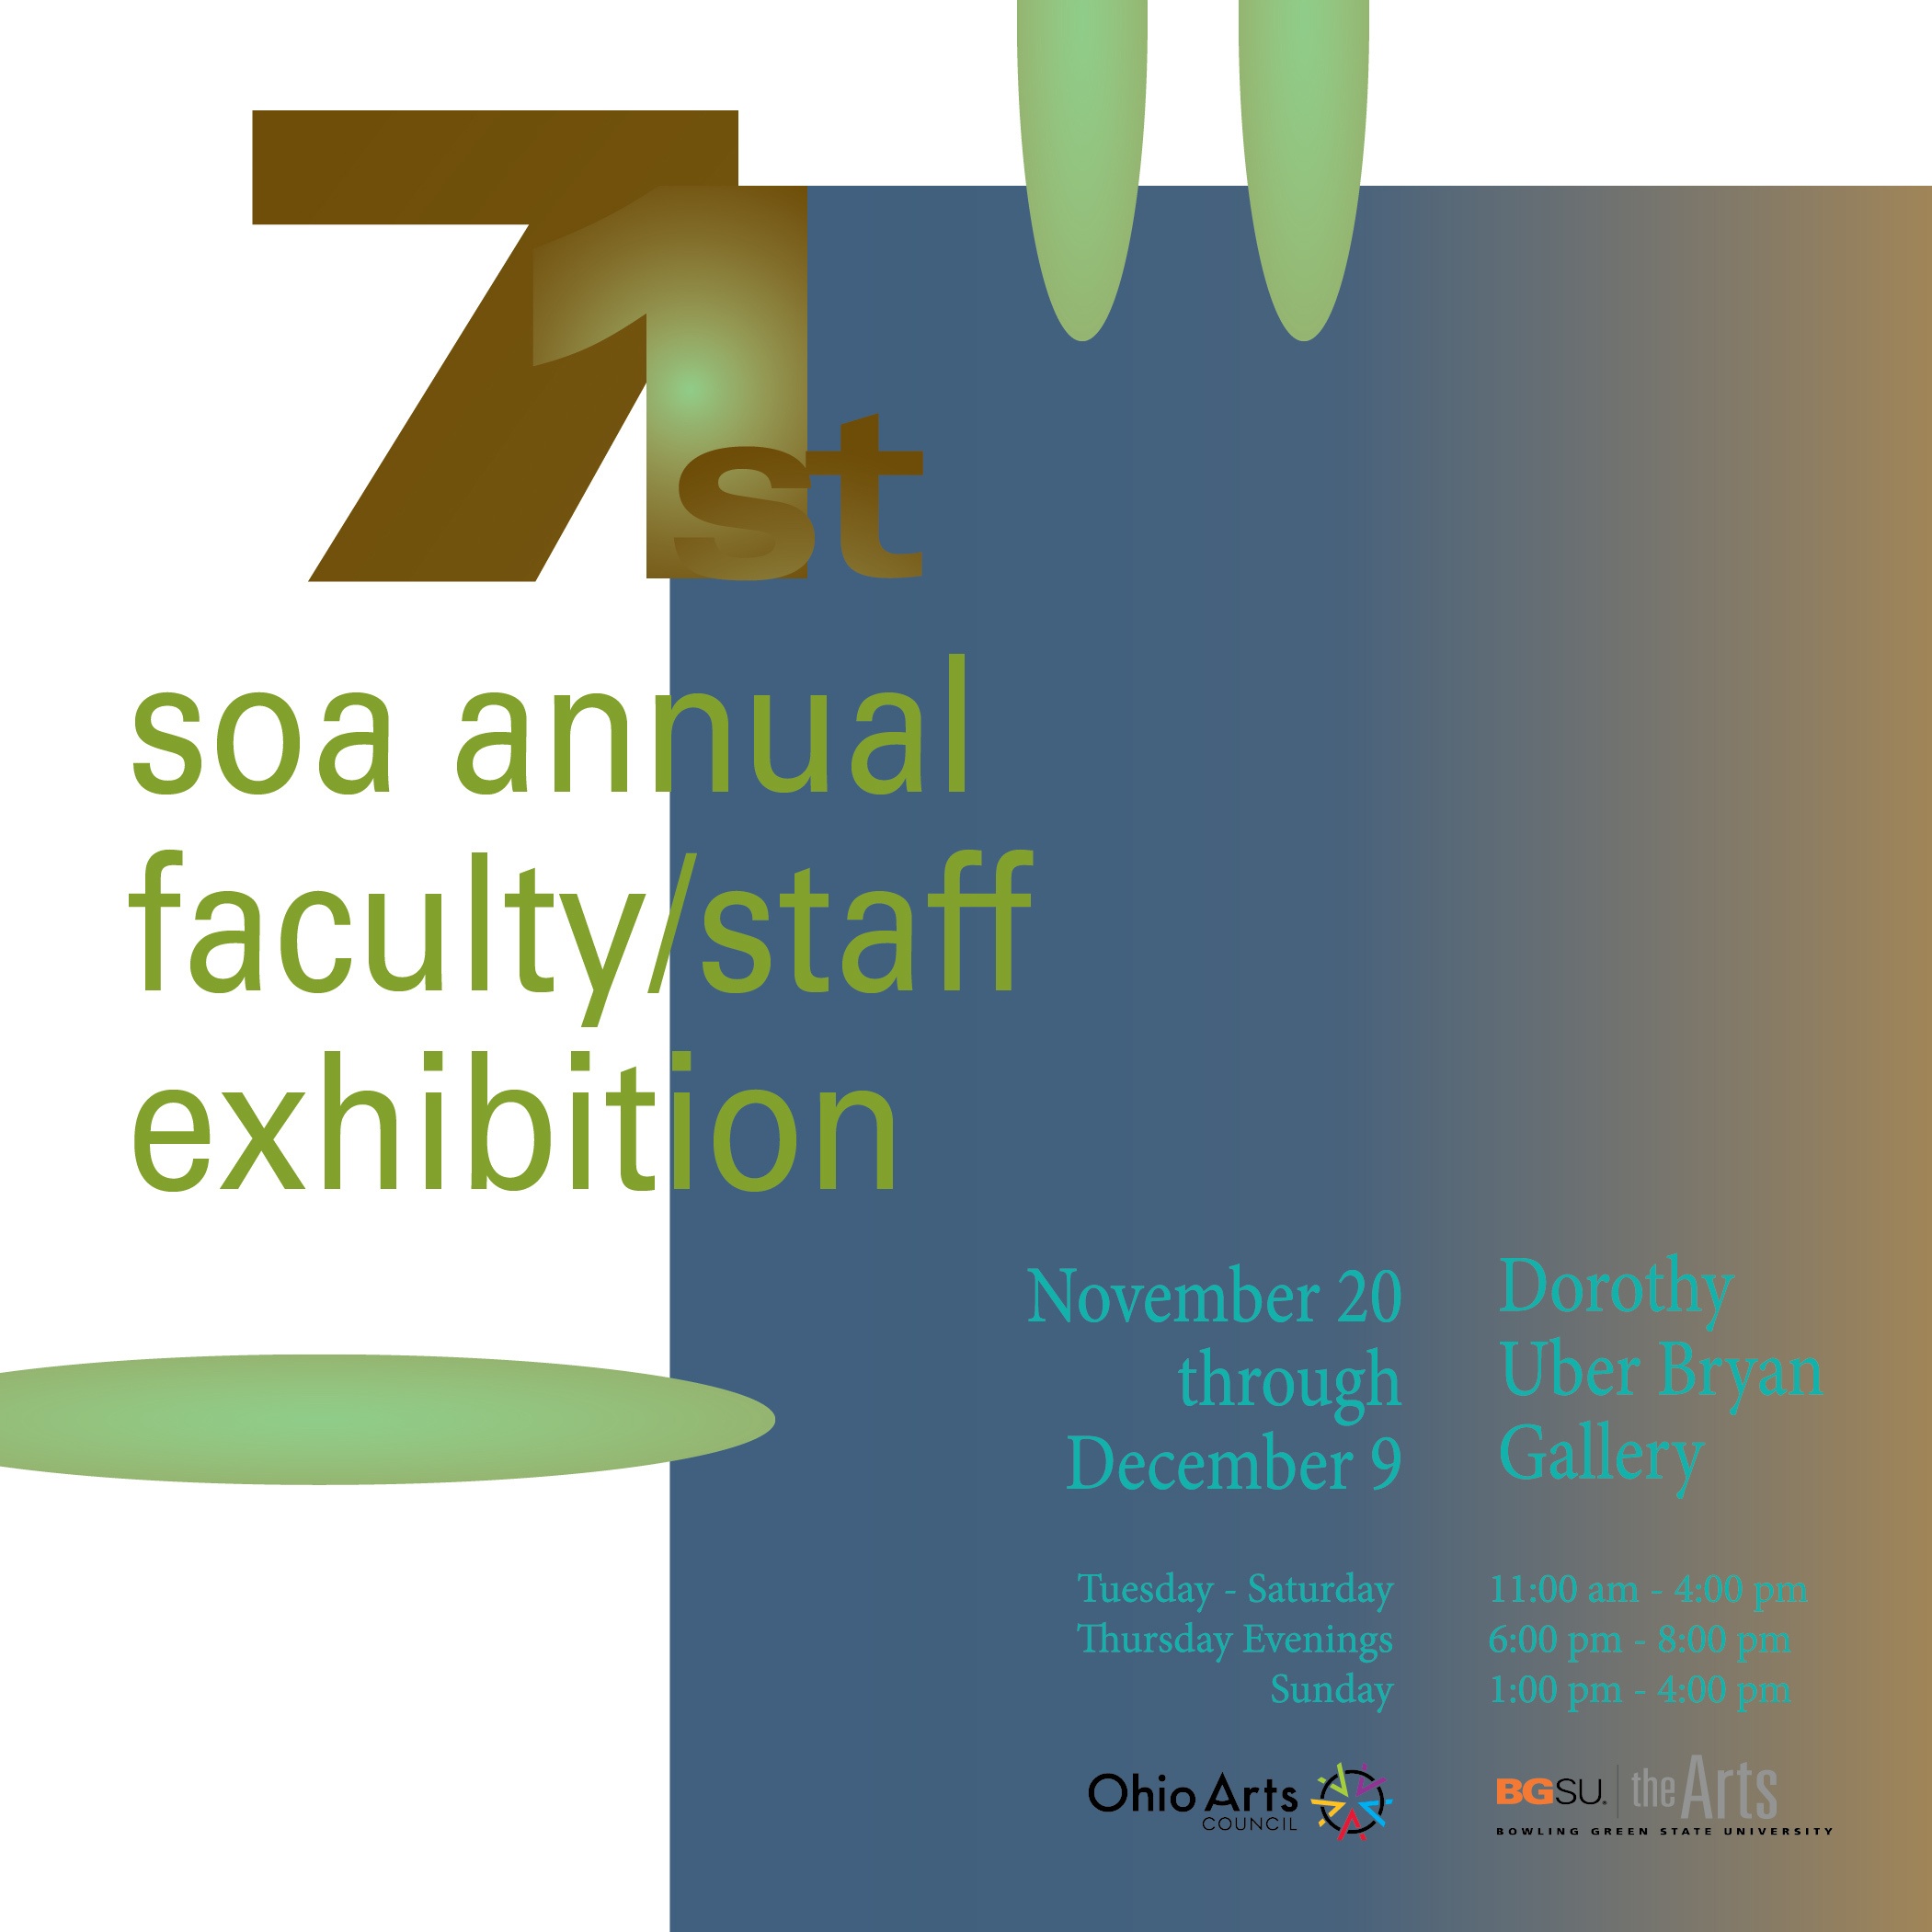 71st SOA annual faculty / staff exhibition, November 20th - December 9th, Dorothy Uber Bryan Gallery